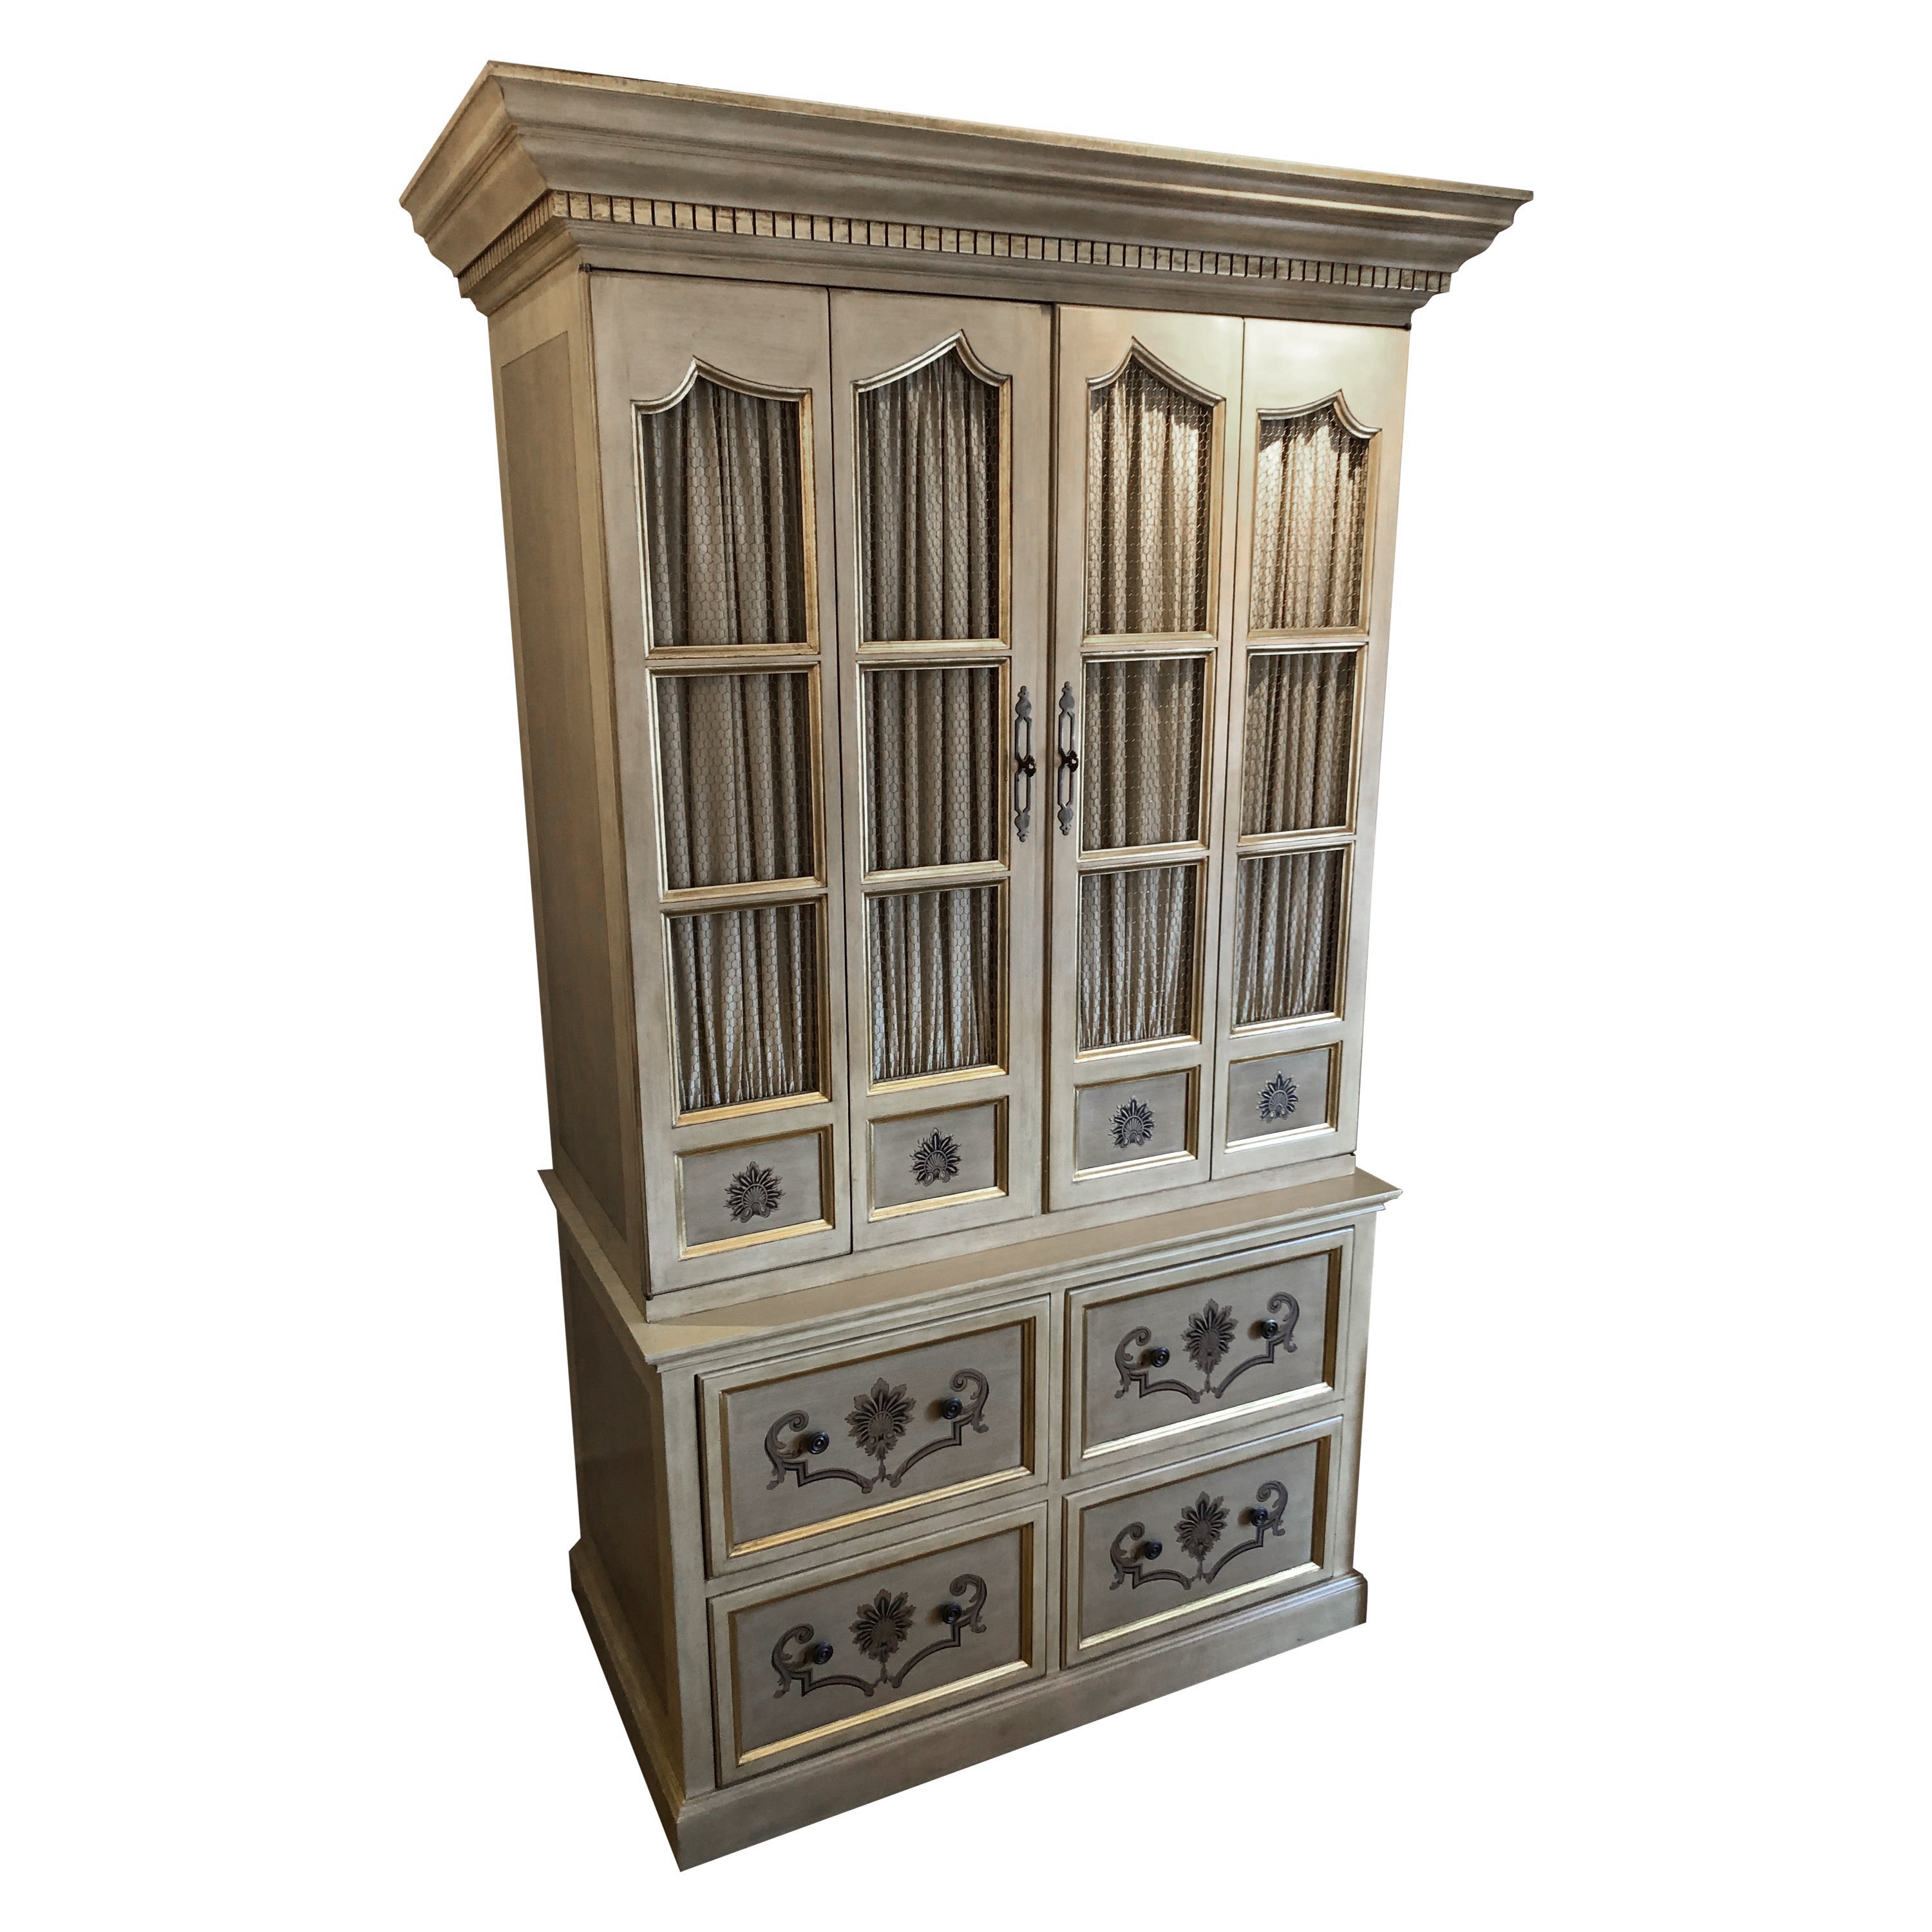 Elegant Very Large Cream & Gold Cabinet with Drawers and Paneled Doors